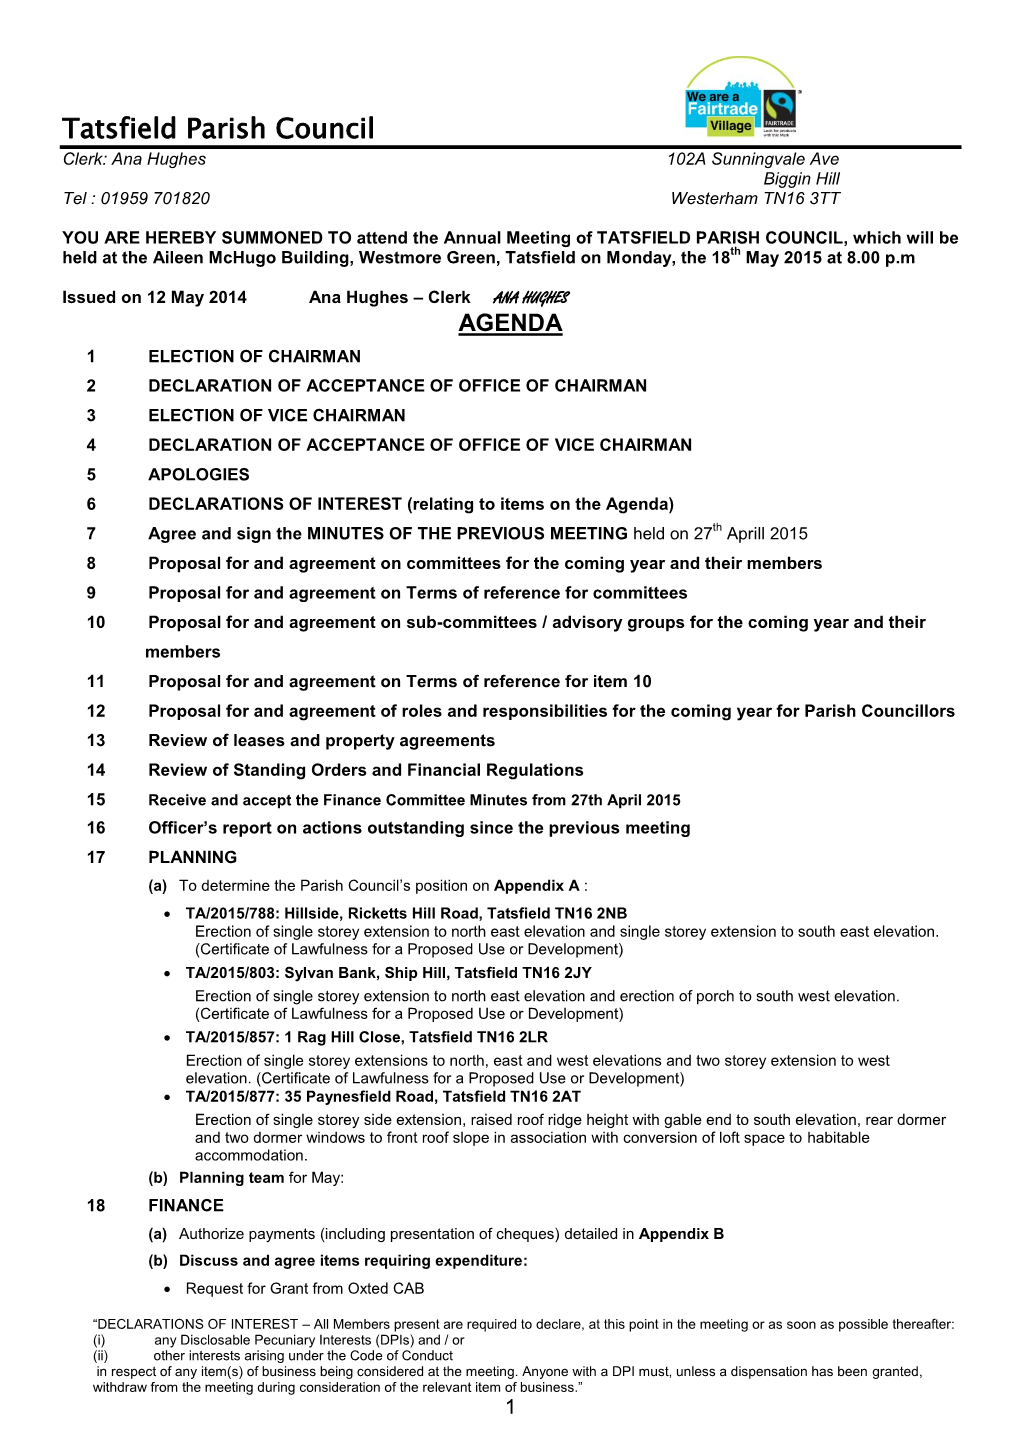 Agenda for Annual Meeting of Tatsfield Parish Council To